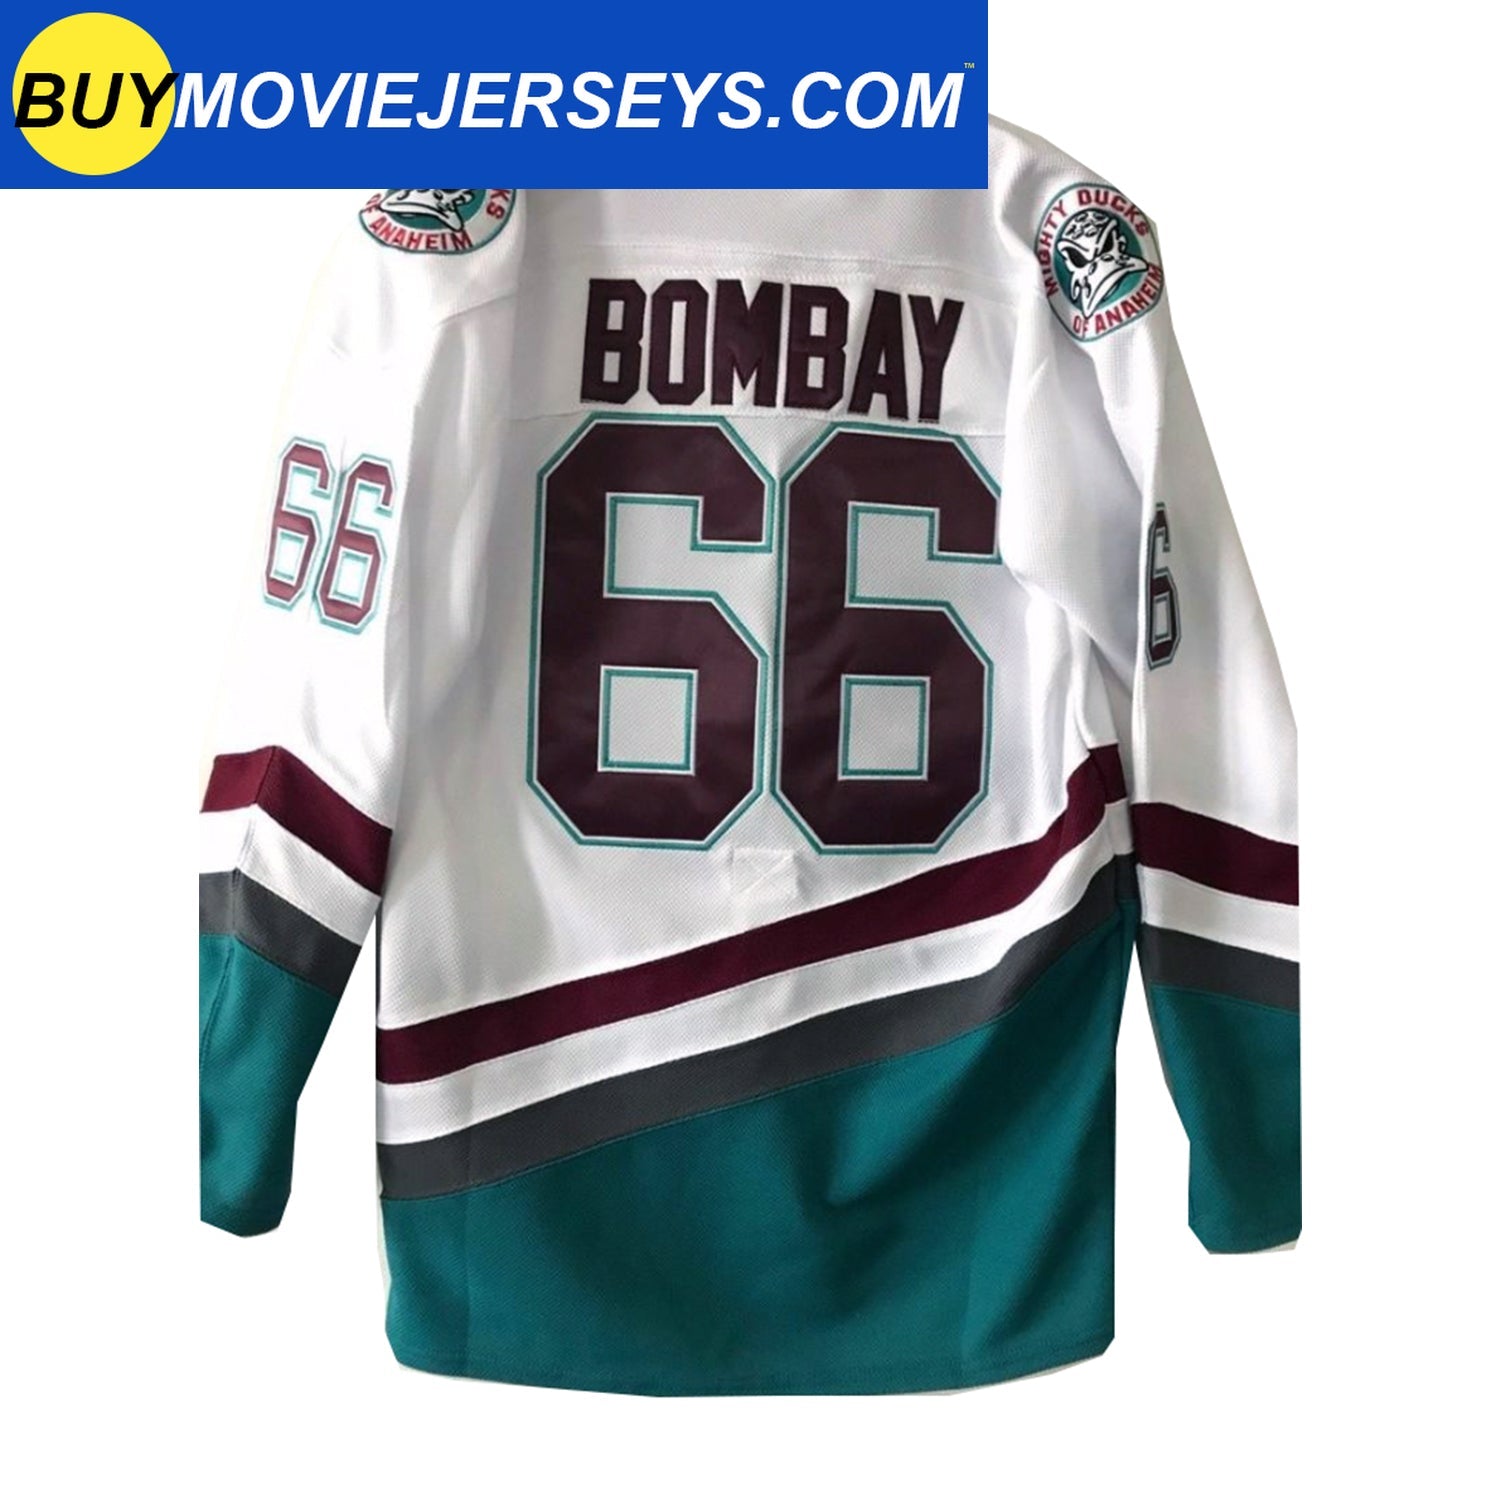 Mighty Ducks Movie Jerseys for sale in New Orleans, Louisiana